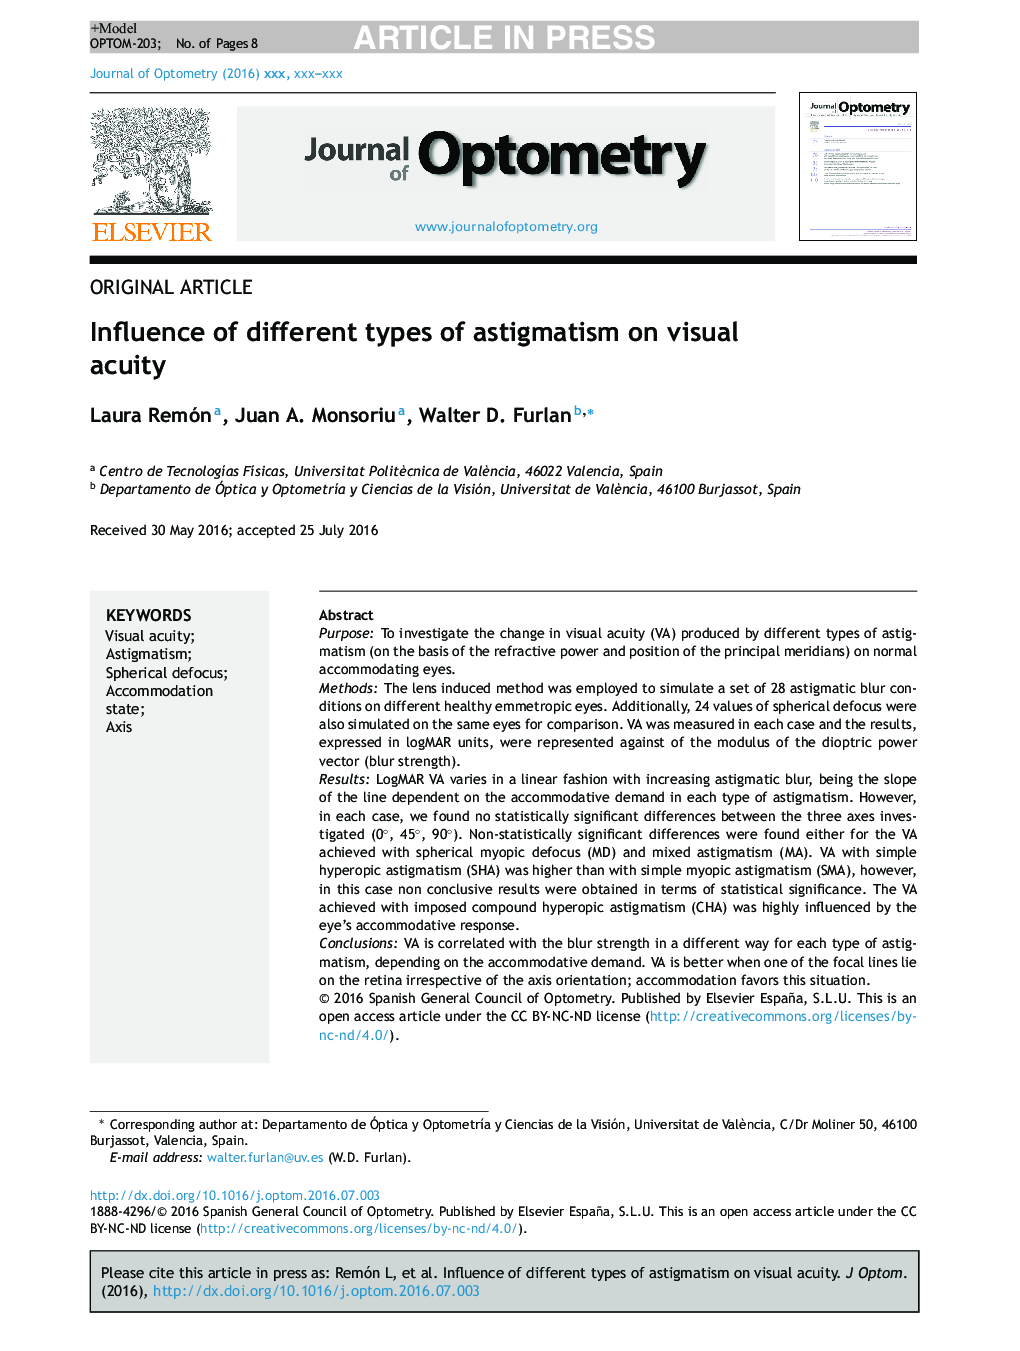 Influence of different types of astigmatism on visual acuity